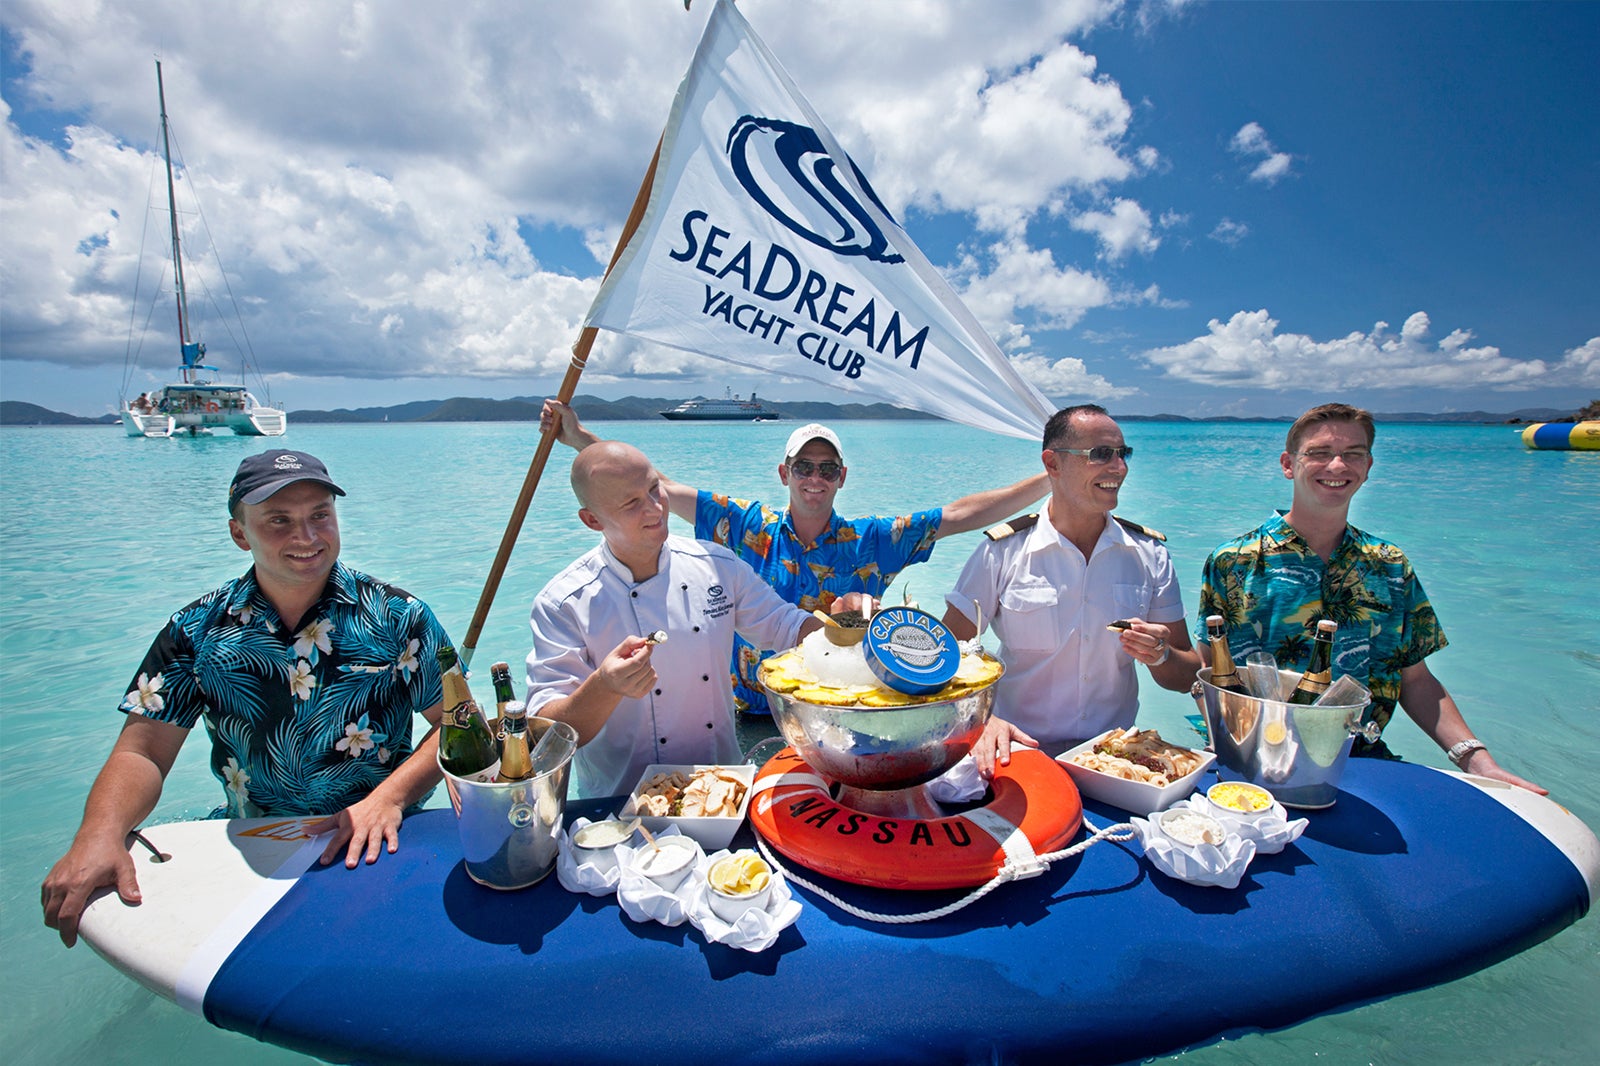 Caviar served on a surfboard with SeaDream Yacht Club